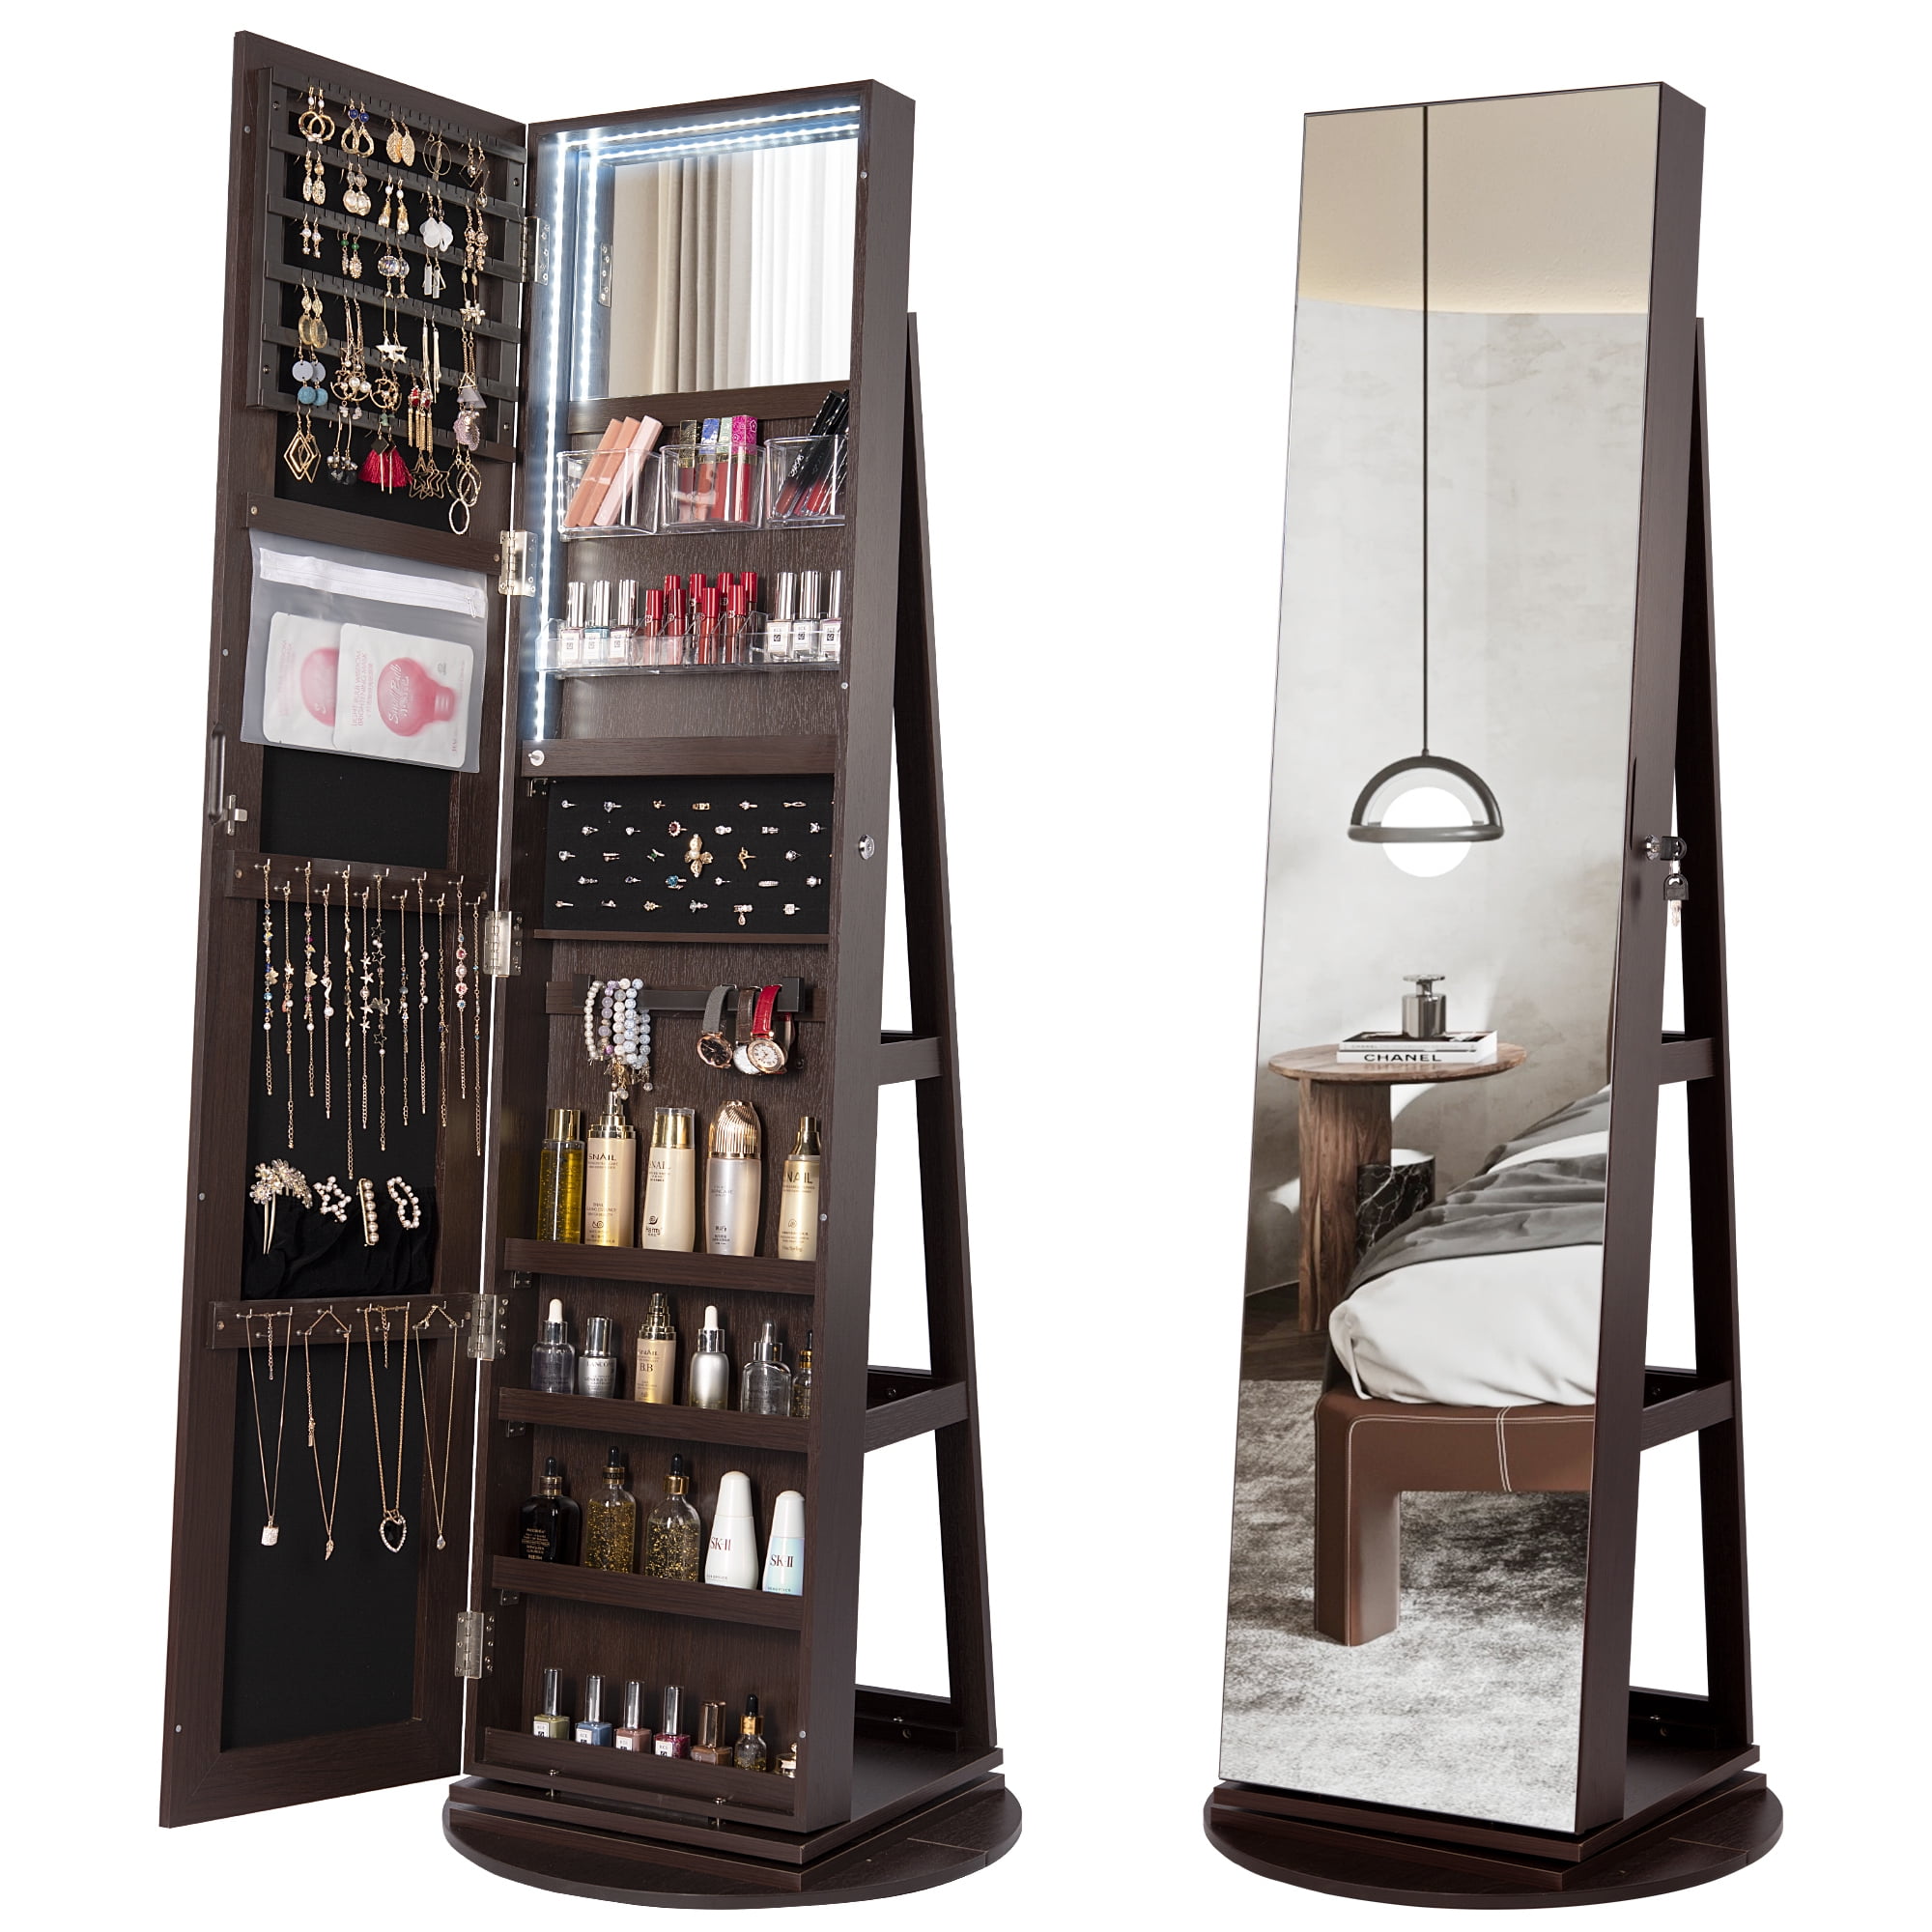 Details about   White Standing Full Length Mirror Jewellery Cabinet Bedroom Makeup Organiser 